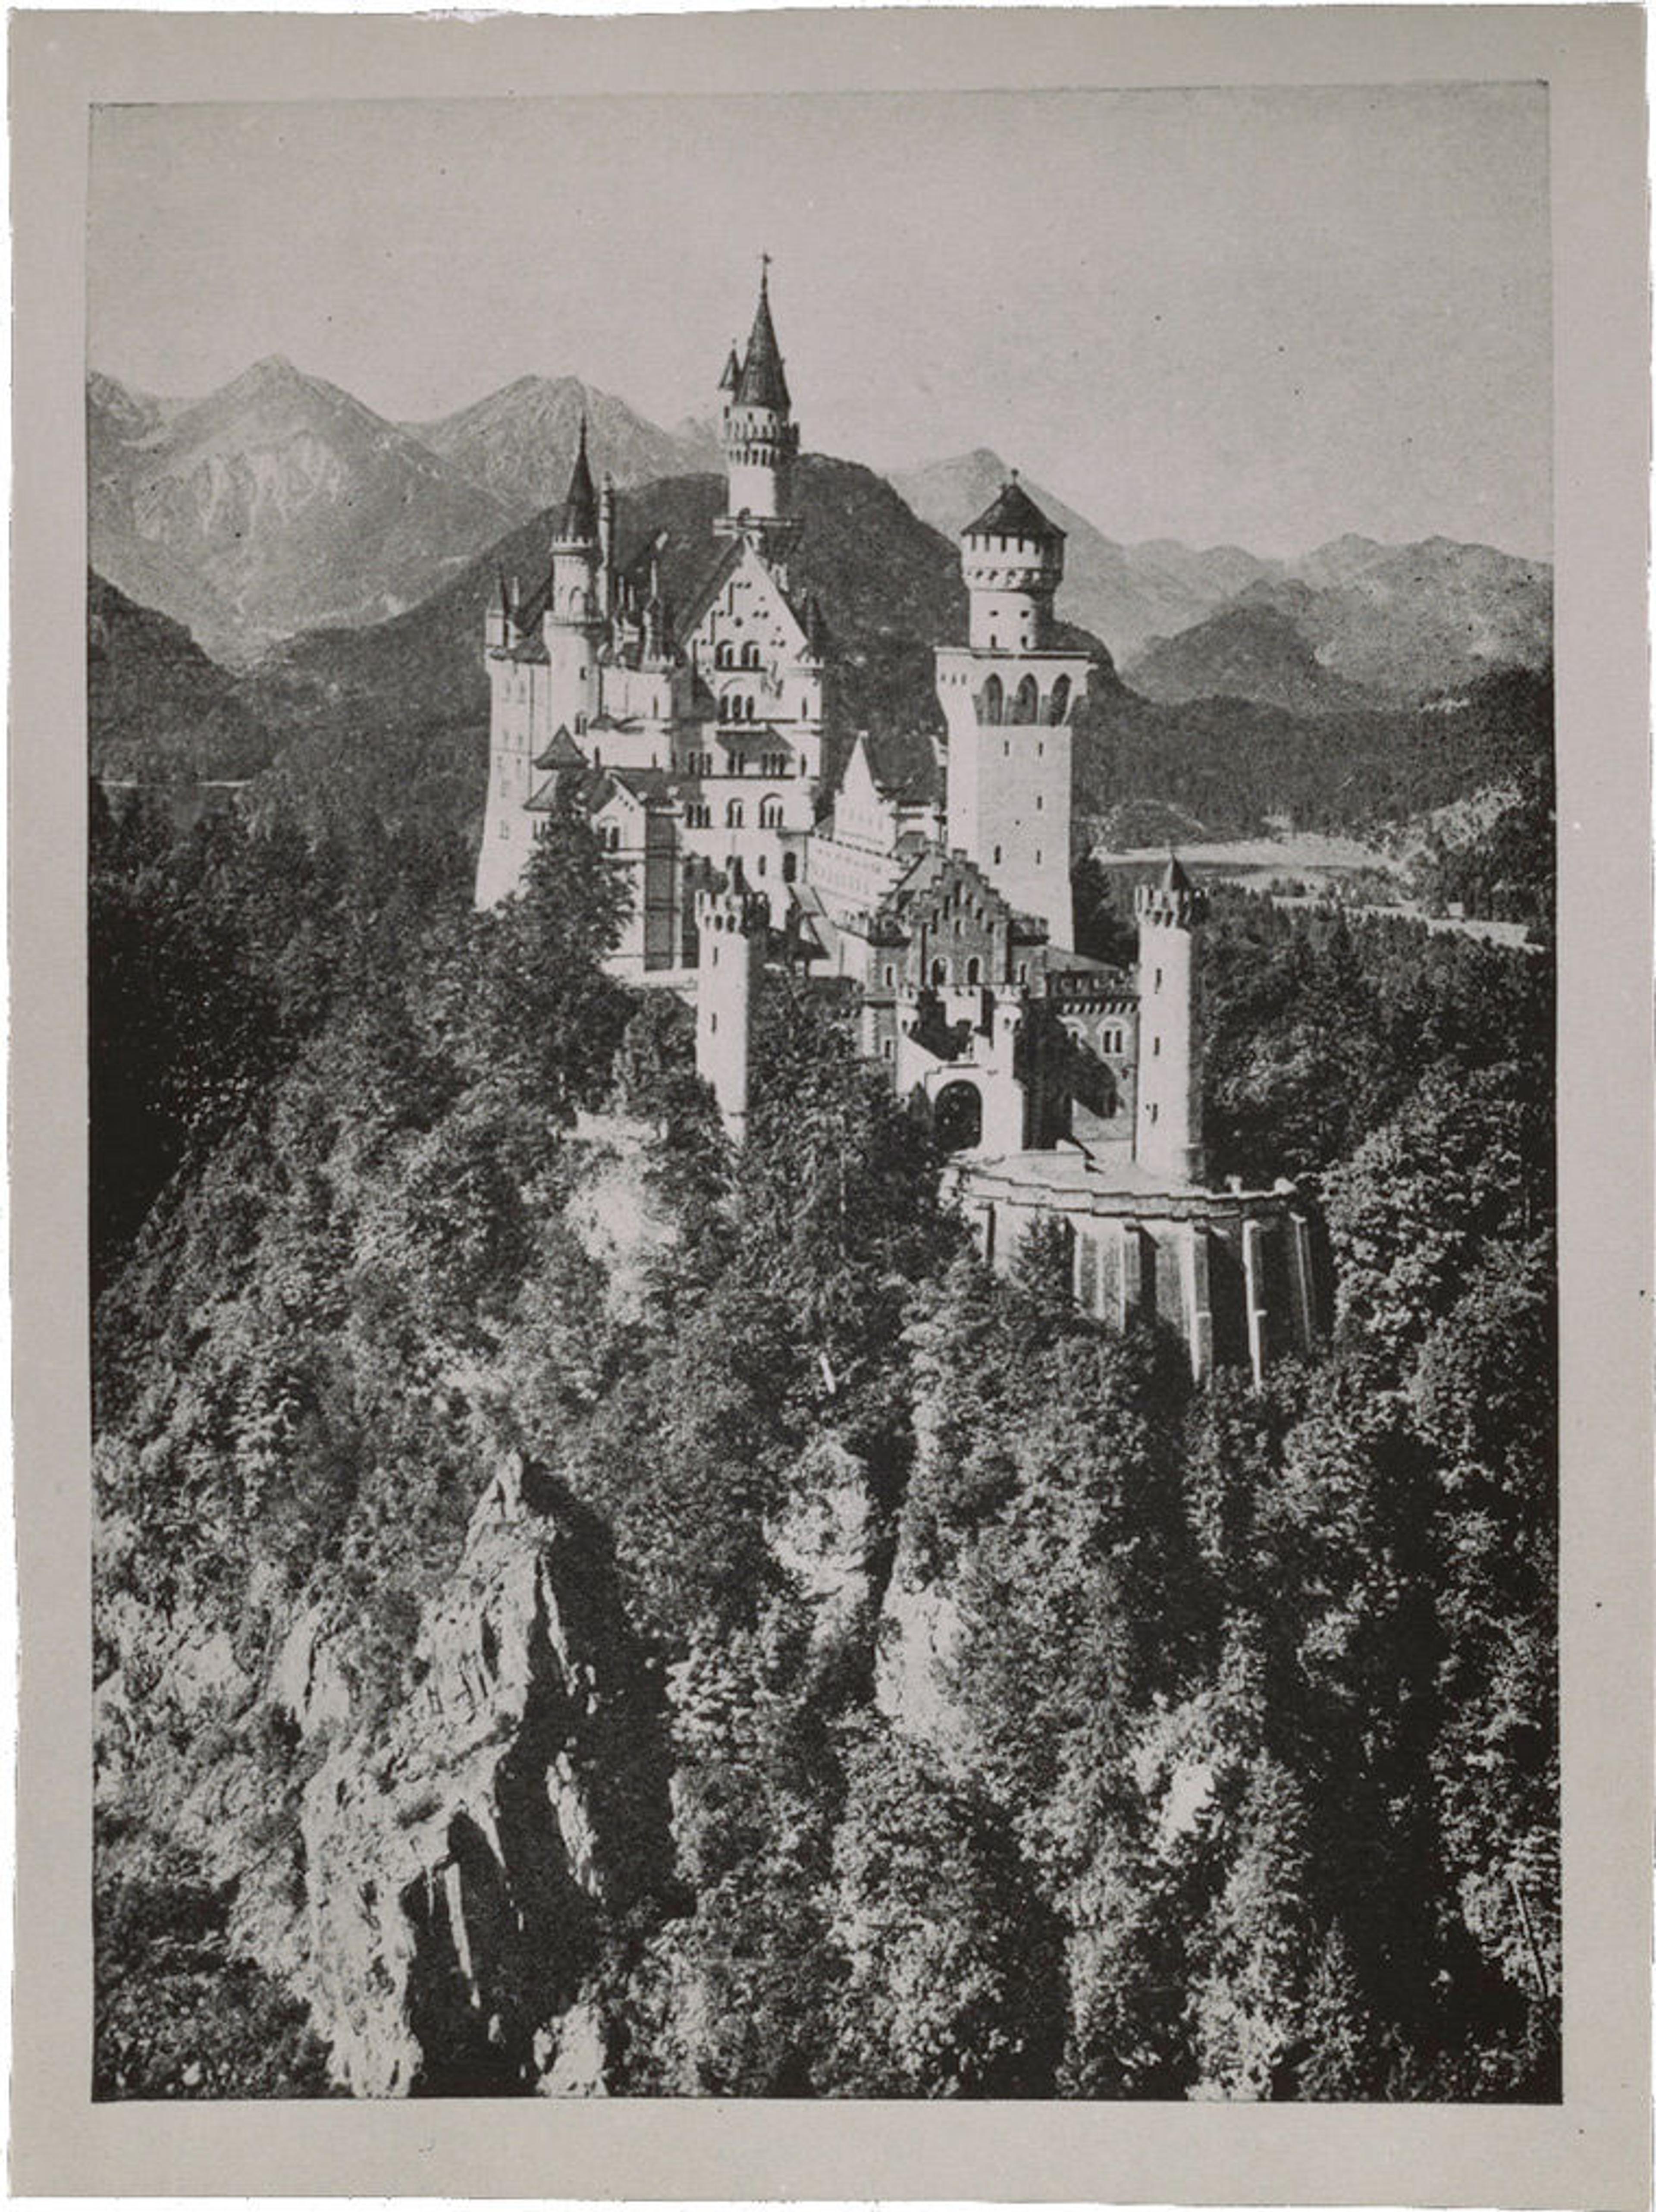 Black-and-white photograph of a fairy-tale style castle perched on a rocky mountain